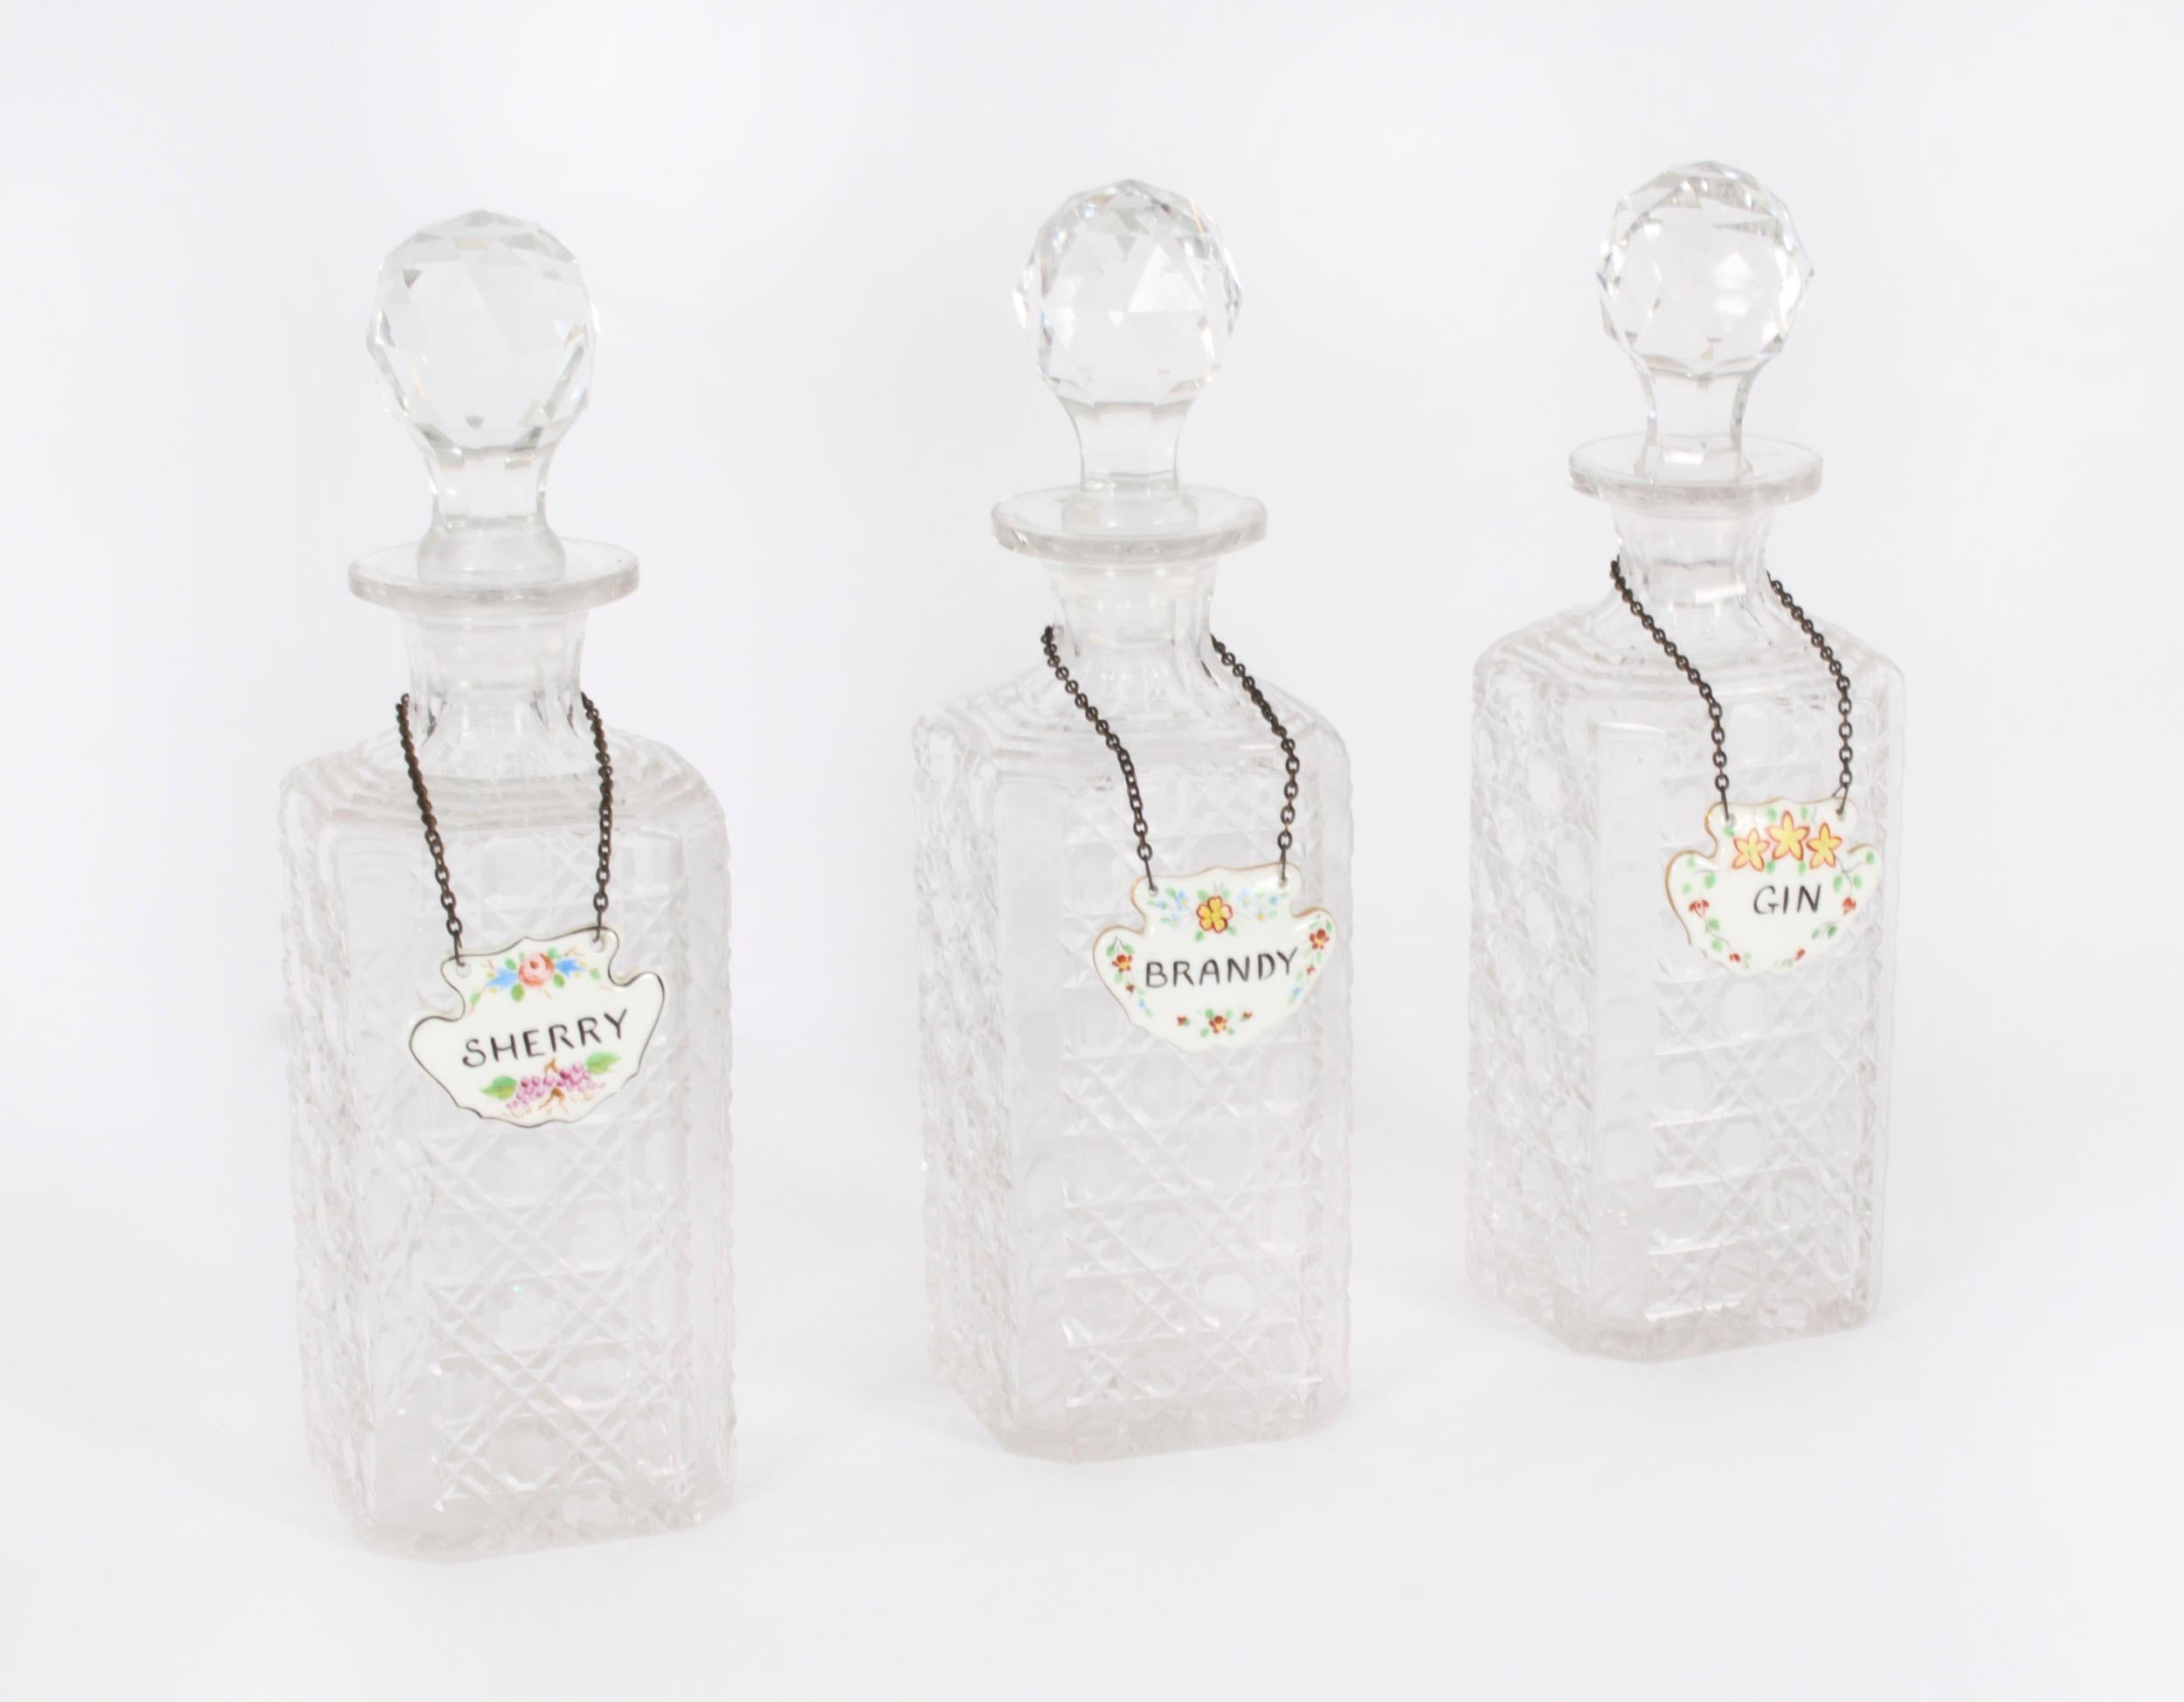 A superb set of three vintage cut crystal square decanters and stoppers, with porcelain spirit labels inscribed 'Sherry', 'Brandy' and 'Gin', dating from the mid 20th Century.
Add an elegant touch to your next dining experience.
 
Condition:
In